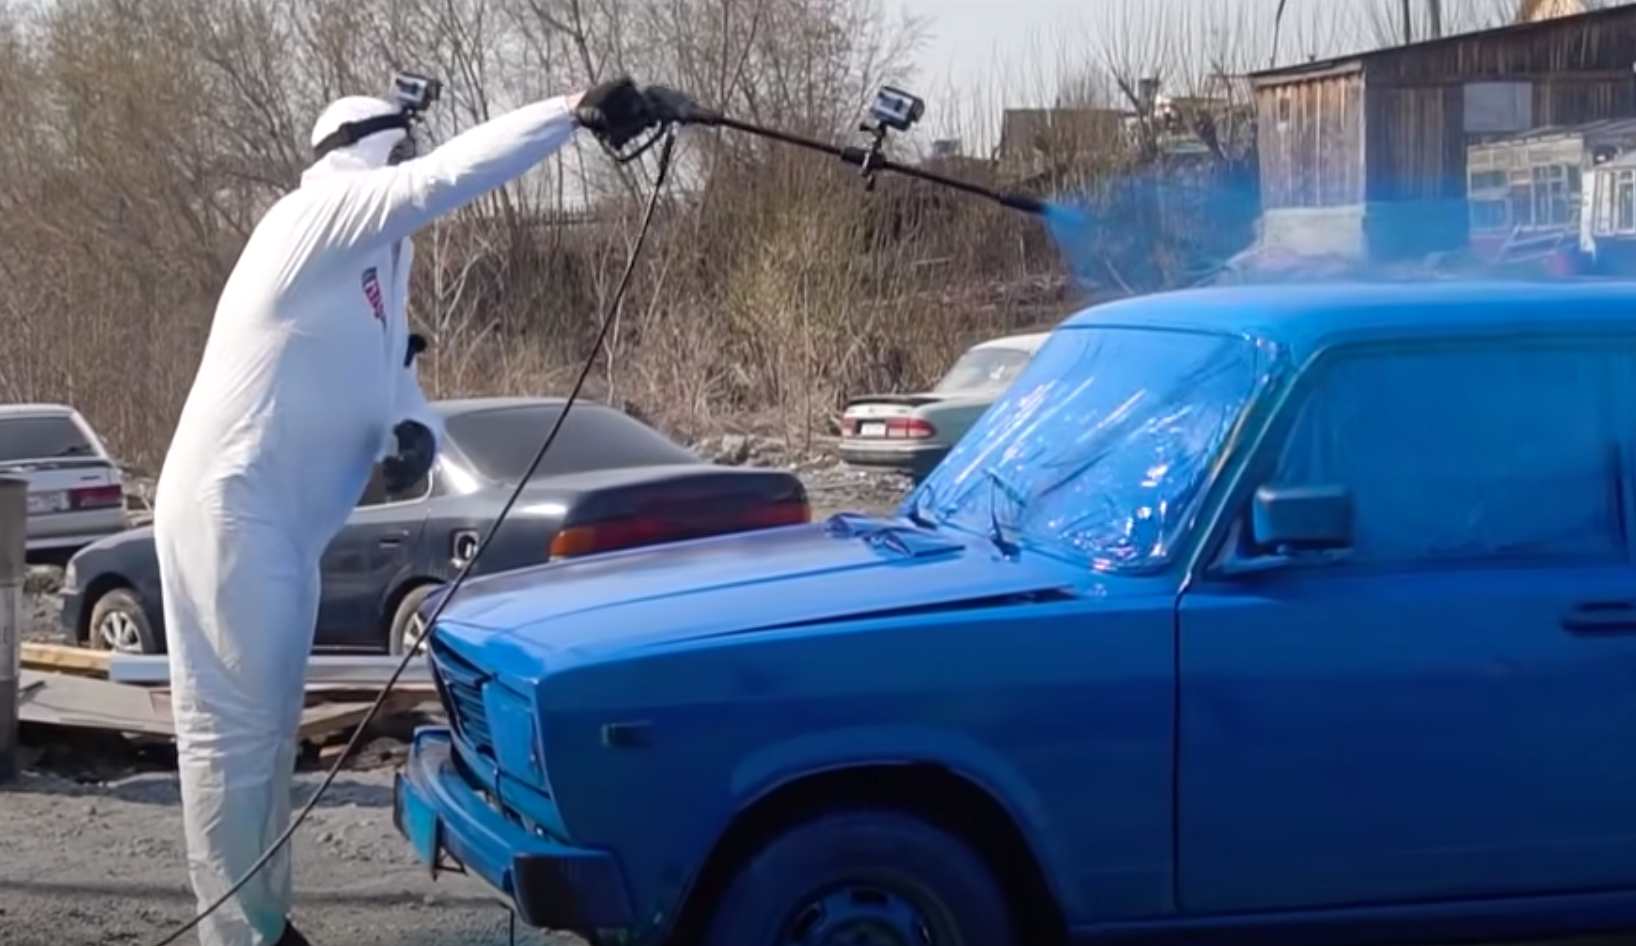 Man using pressure washer to paint Lada blue in open parking lot